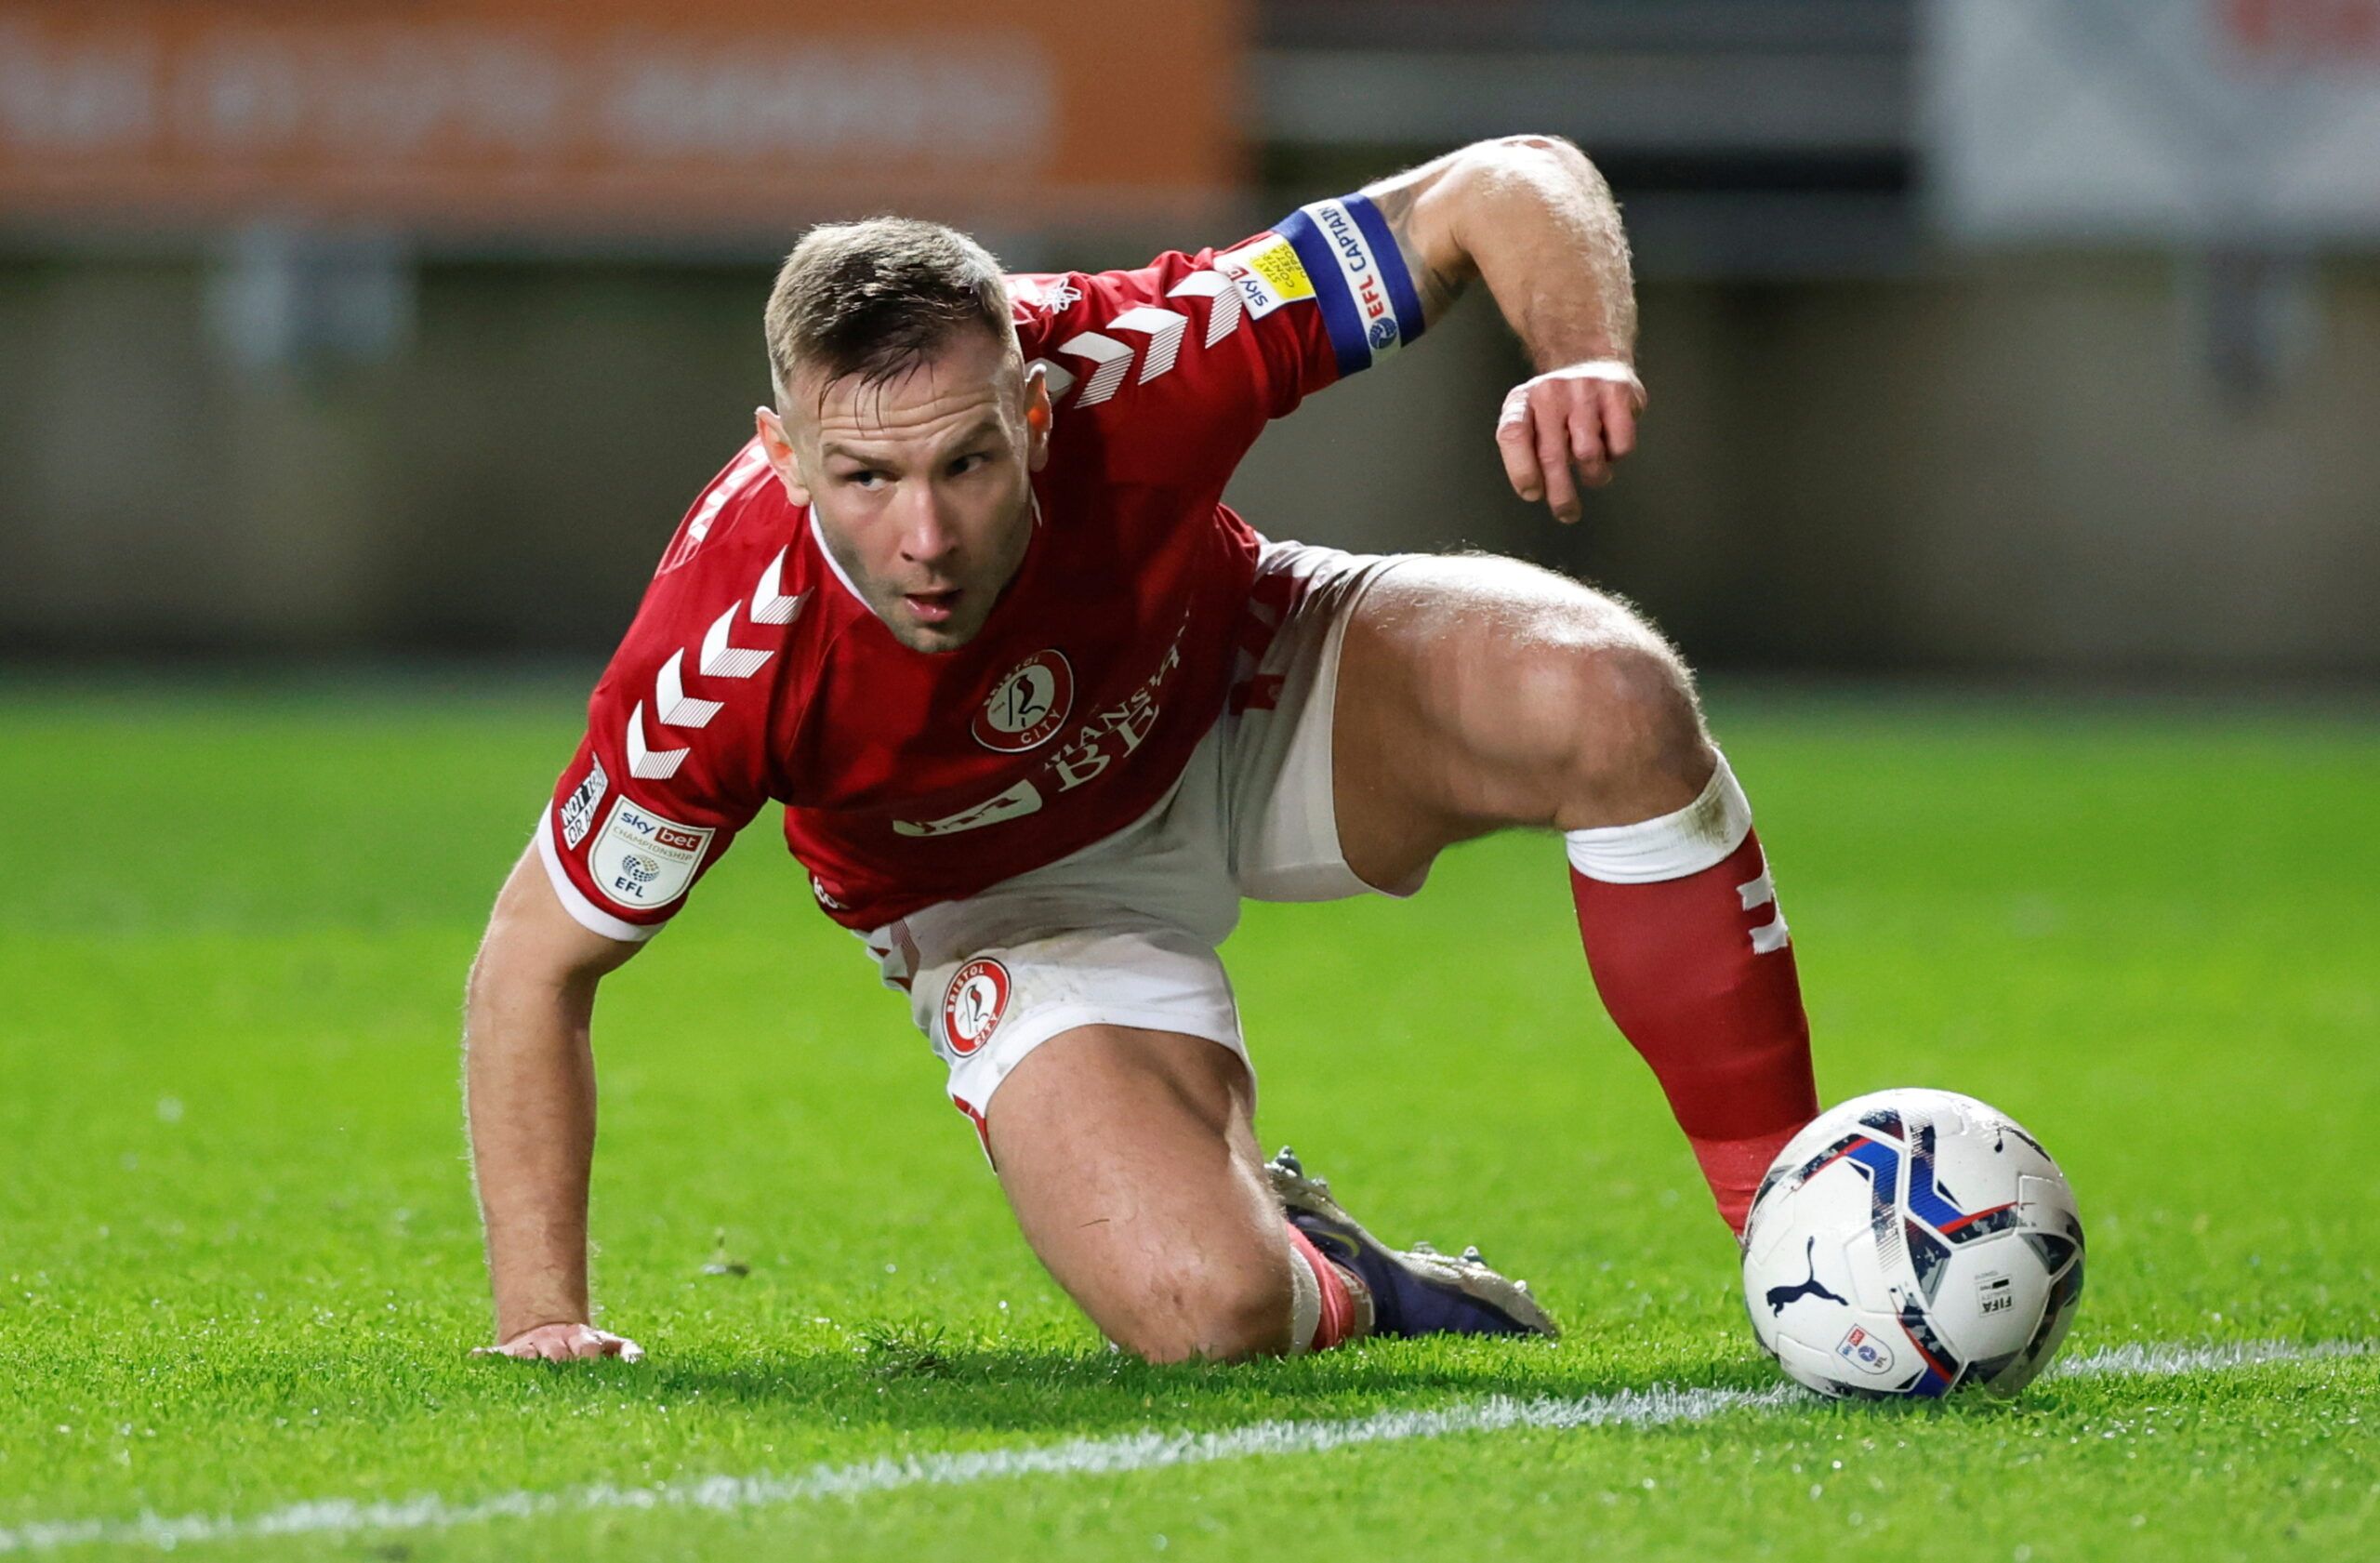 Soccer Football - Championship - Bristol City v Reading - Ashton Gate Stadium, Bristol, Britain - February 9, 2022  Bristol City?s Andreas Weimann in action   Action Images/Peter Cziborra  EDITORIAL USE ONLY. No use with unauthorized audio, video, data, fixture lists, club/league logos or 